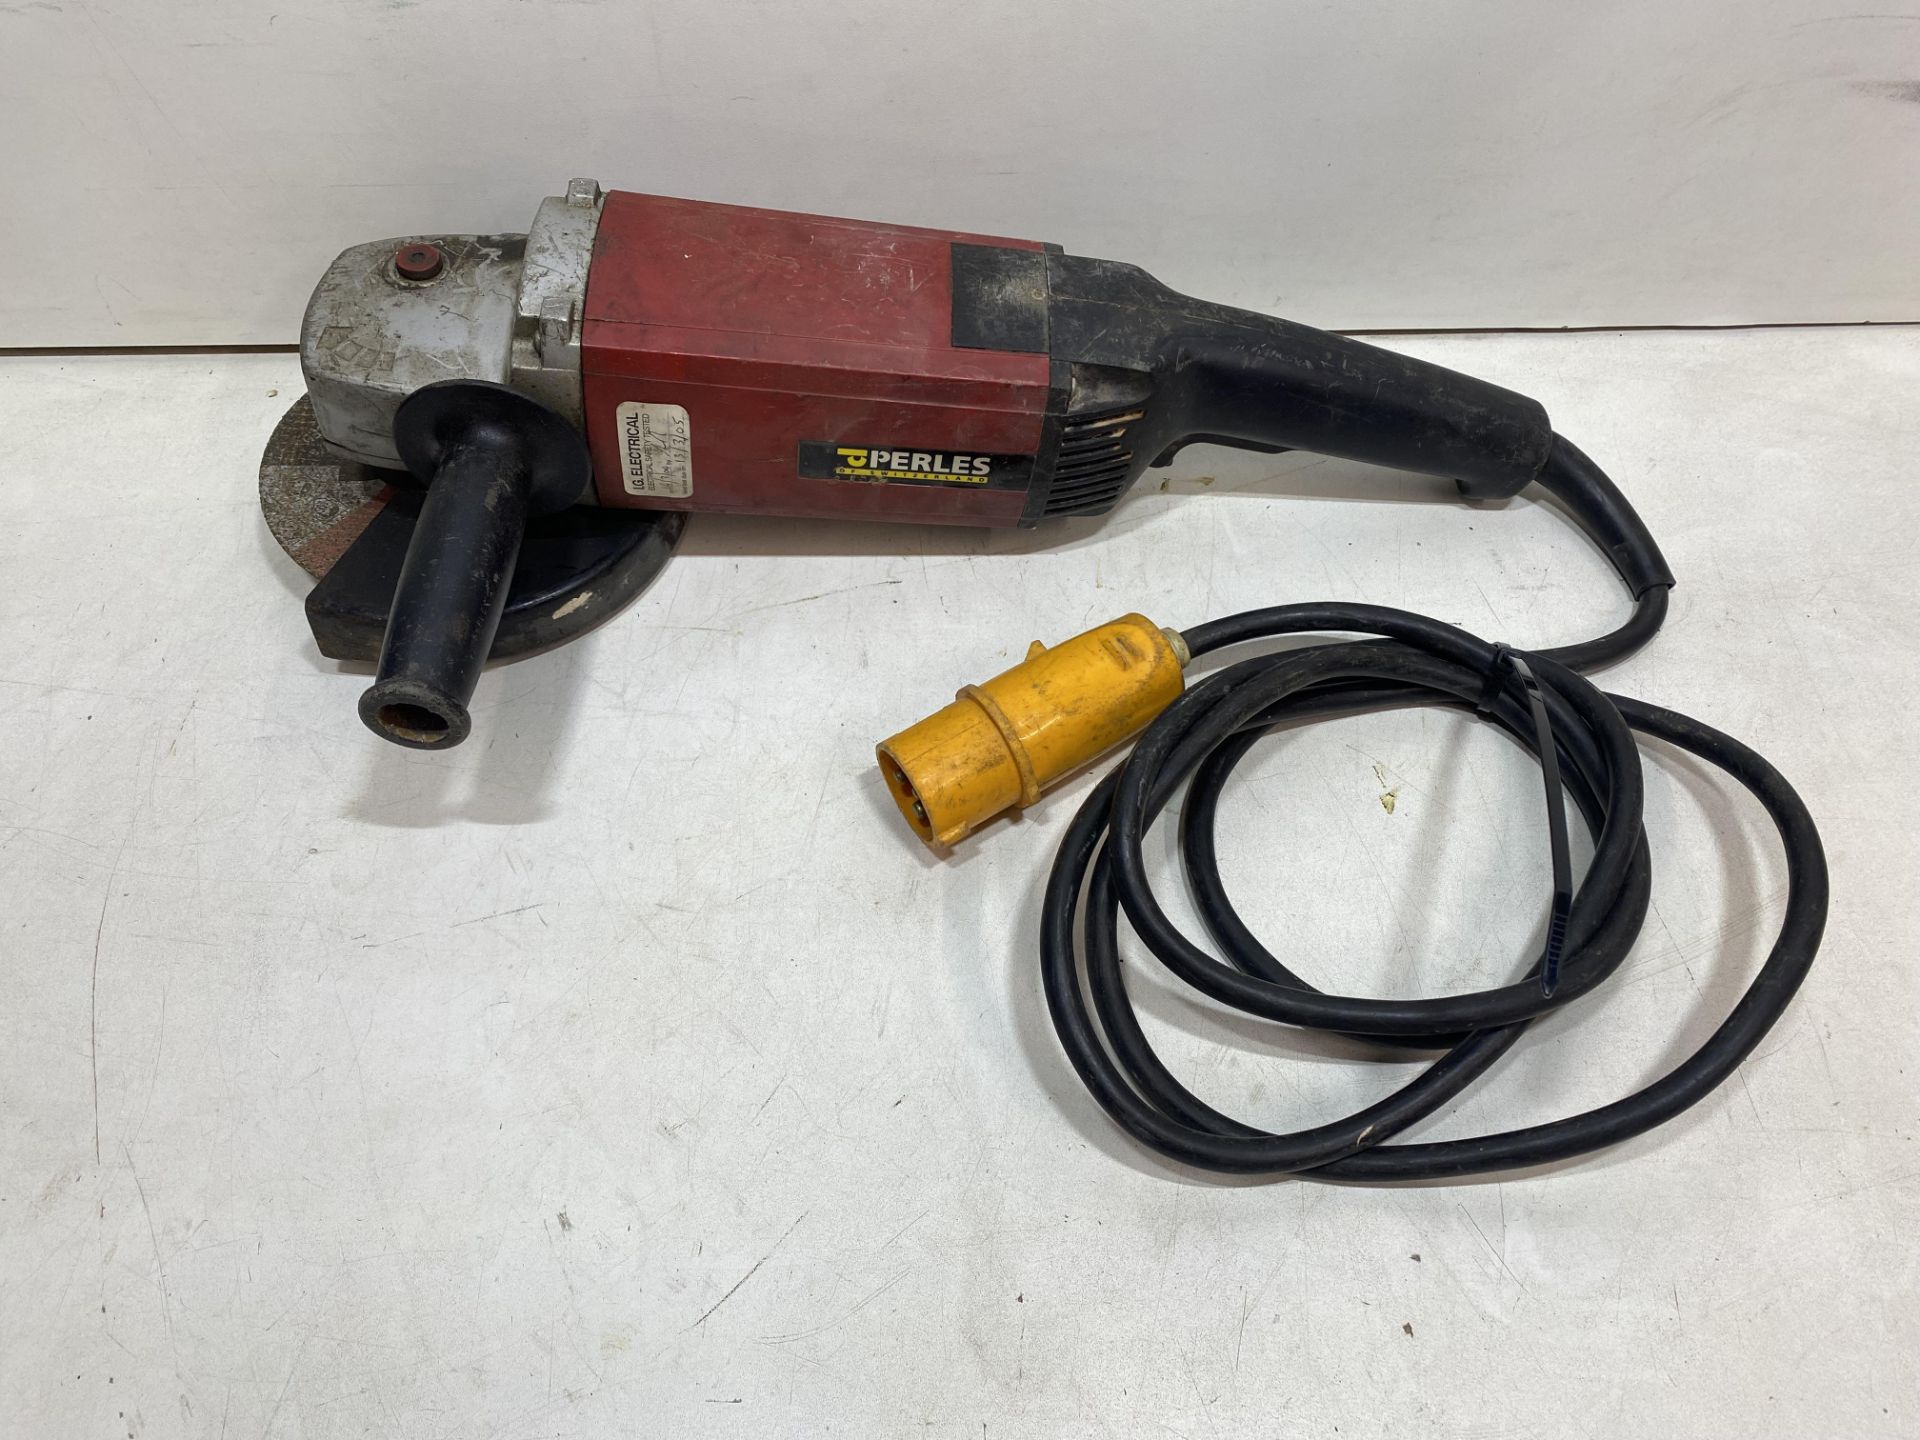 Perles HSW 5208 110v Angle Grinder With Spare Discs - Image 2 of 13